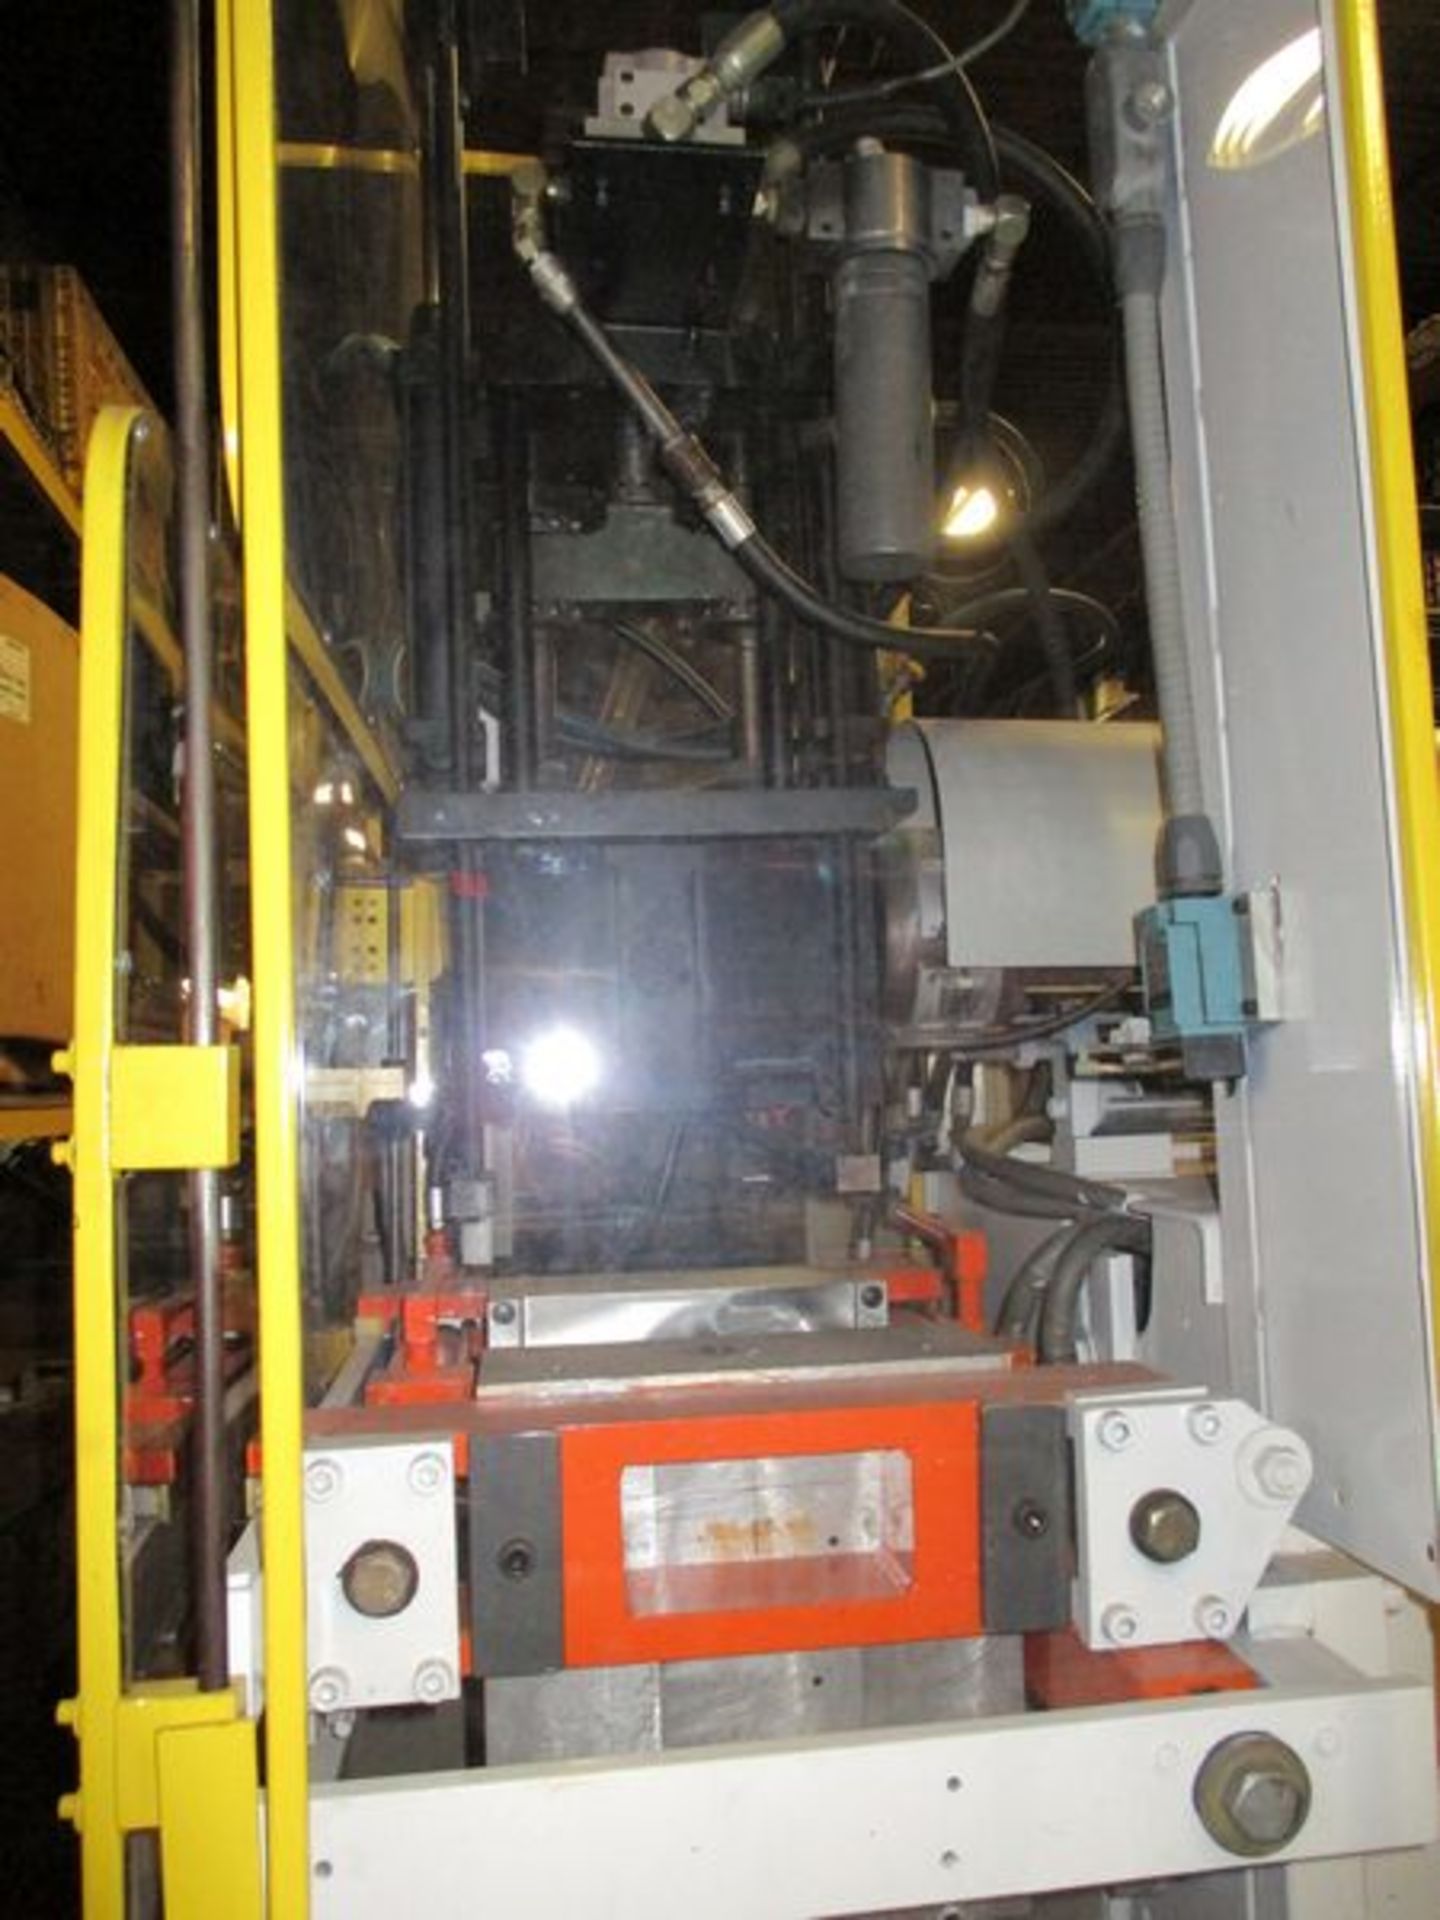 Ingersoll Rand Impco B13 Extrusion Blow Molder - Sterling Heights, MI - Image 3 of 12